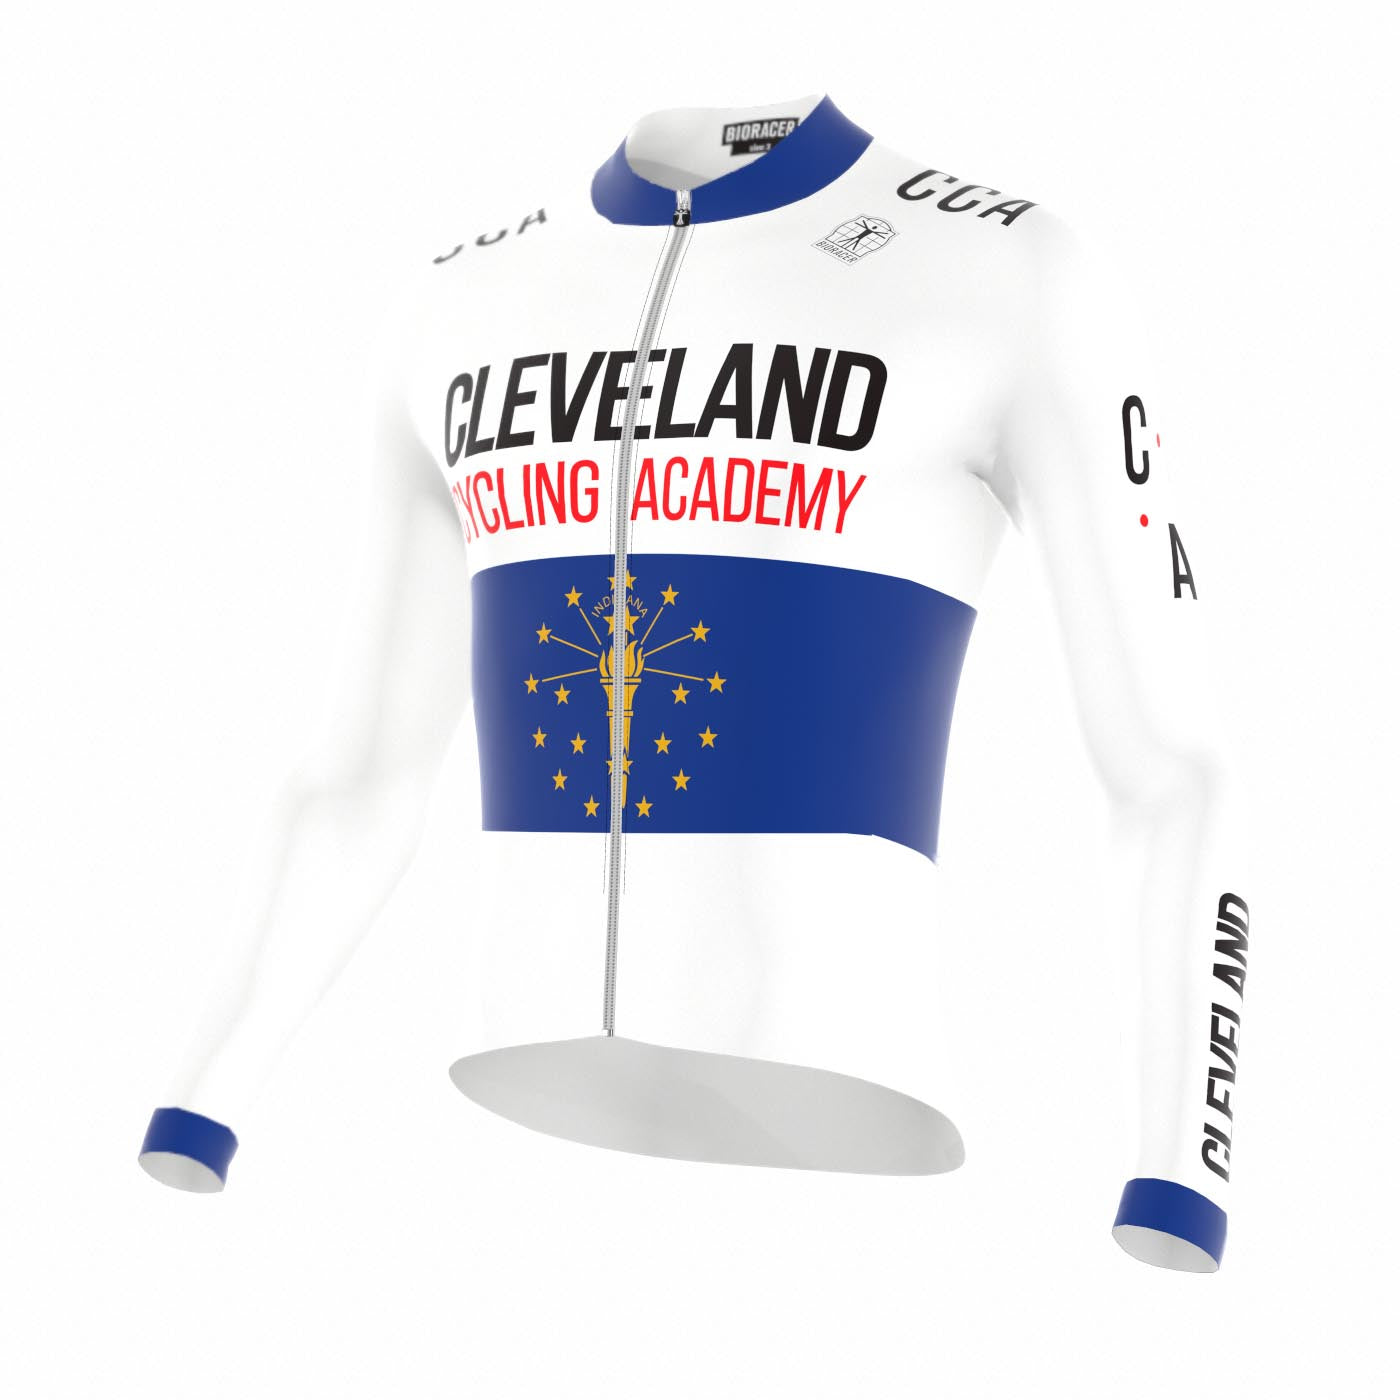 Epic Long Sleeve Jersey - Plus - Men (Indiana State)